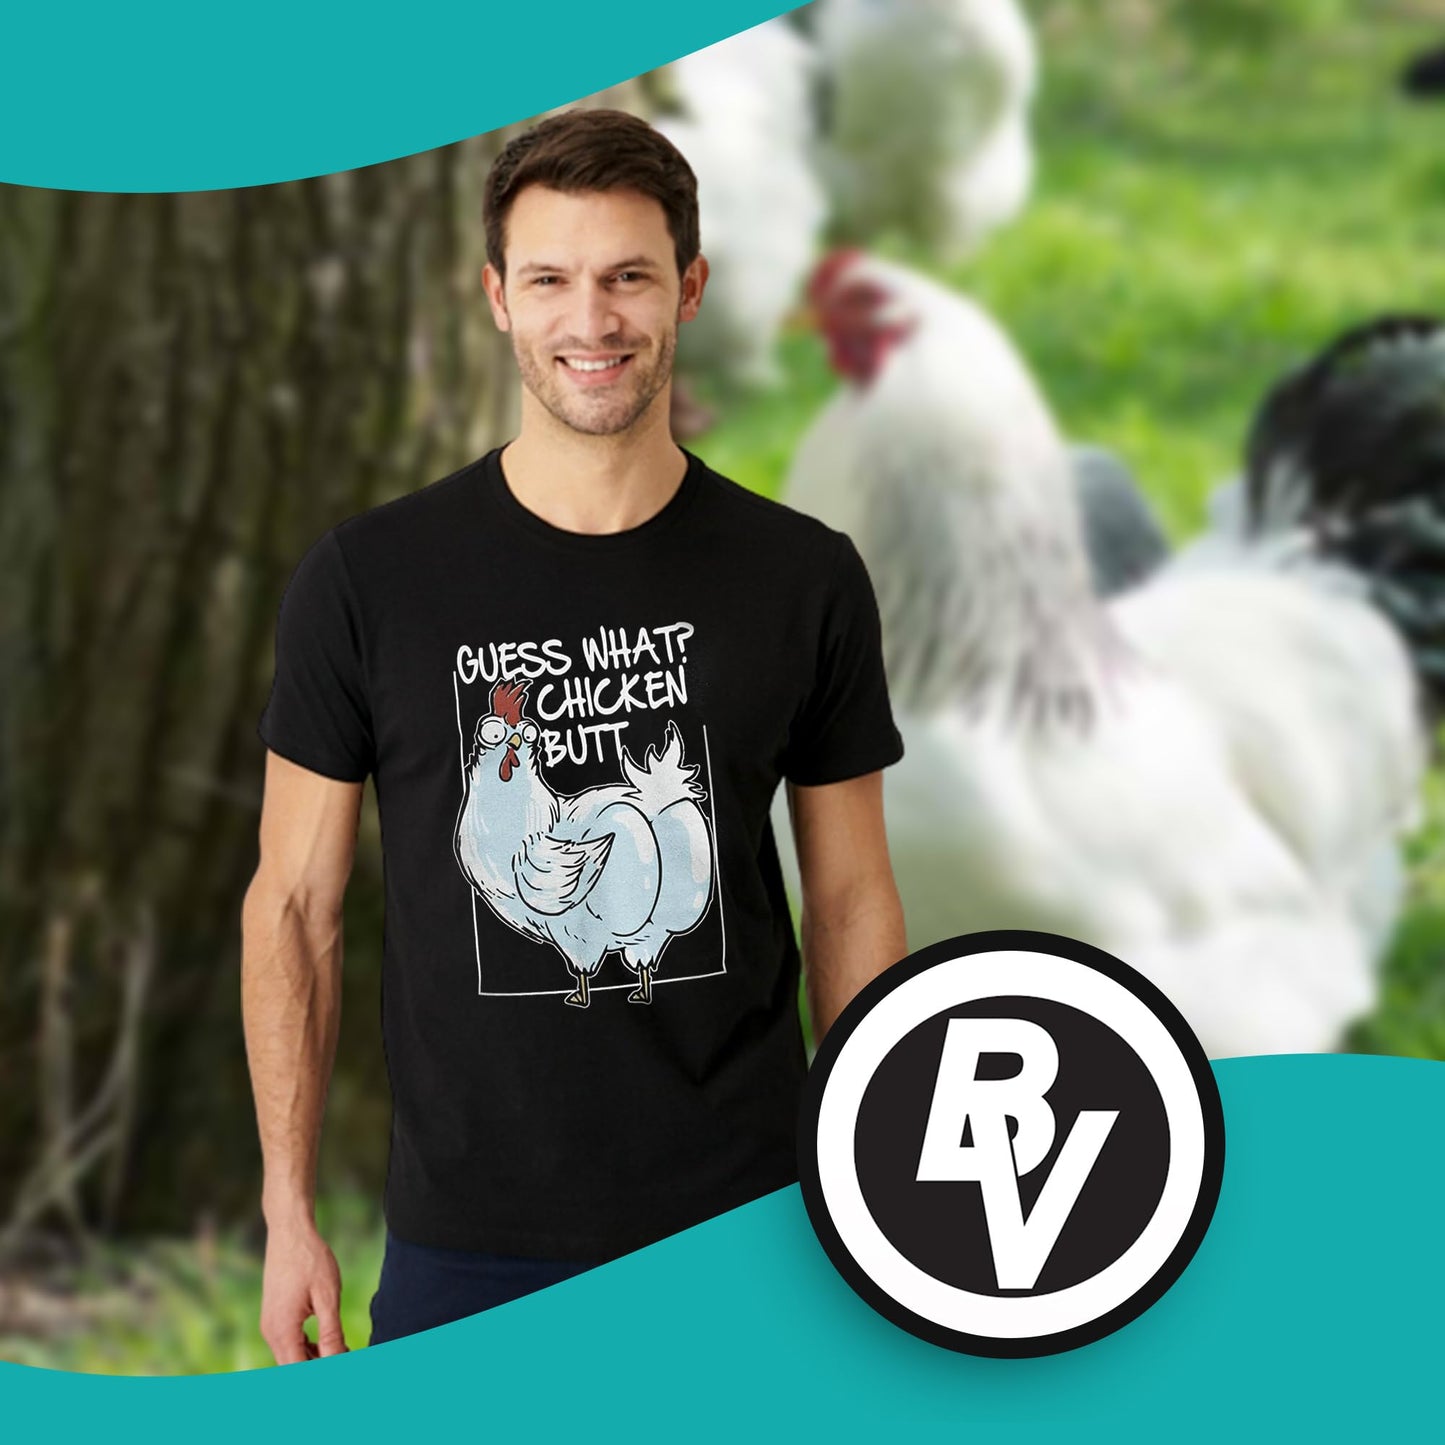 BROOKLYN VERTICAL Guess What? Chicken Butt! | Funny Adult Humor Short Sleeve Crew Neck T-Shirt